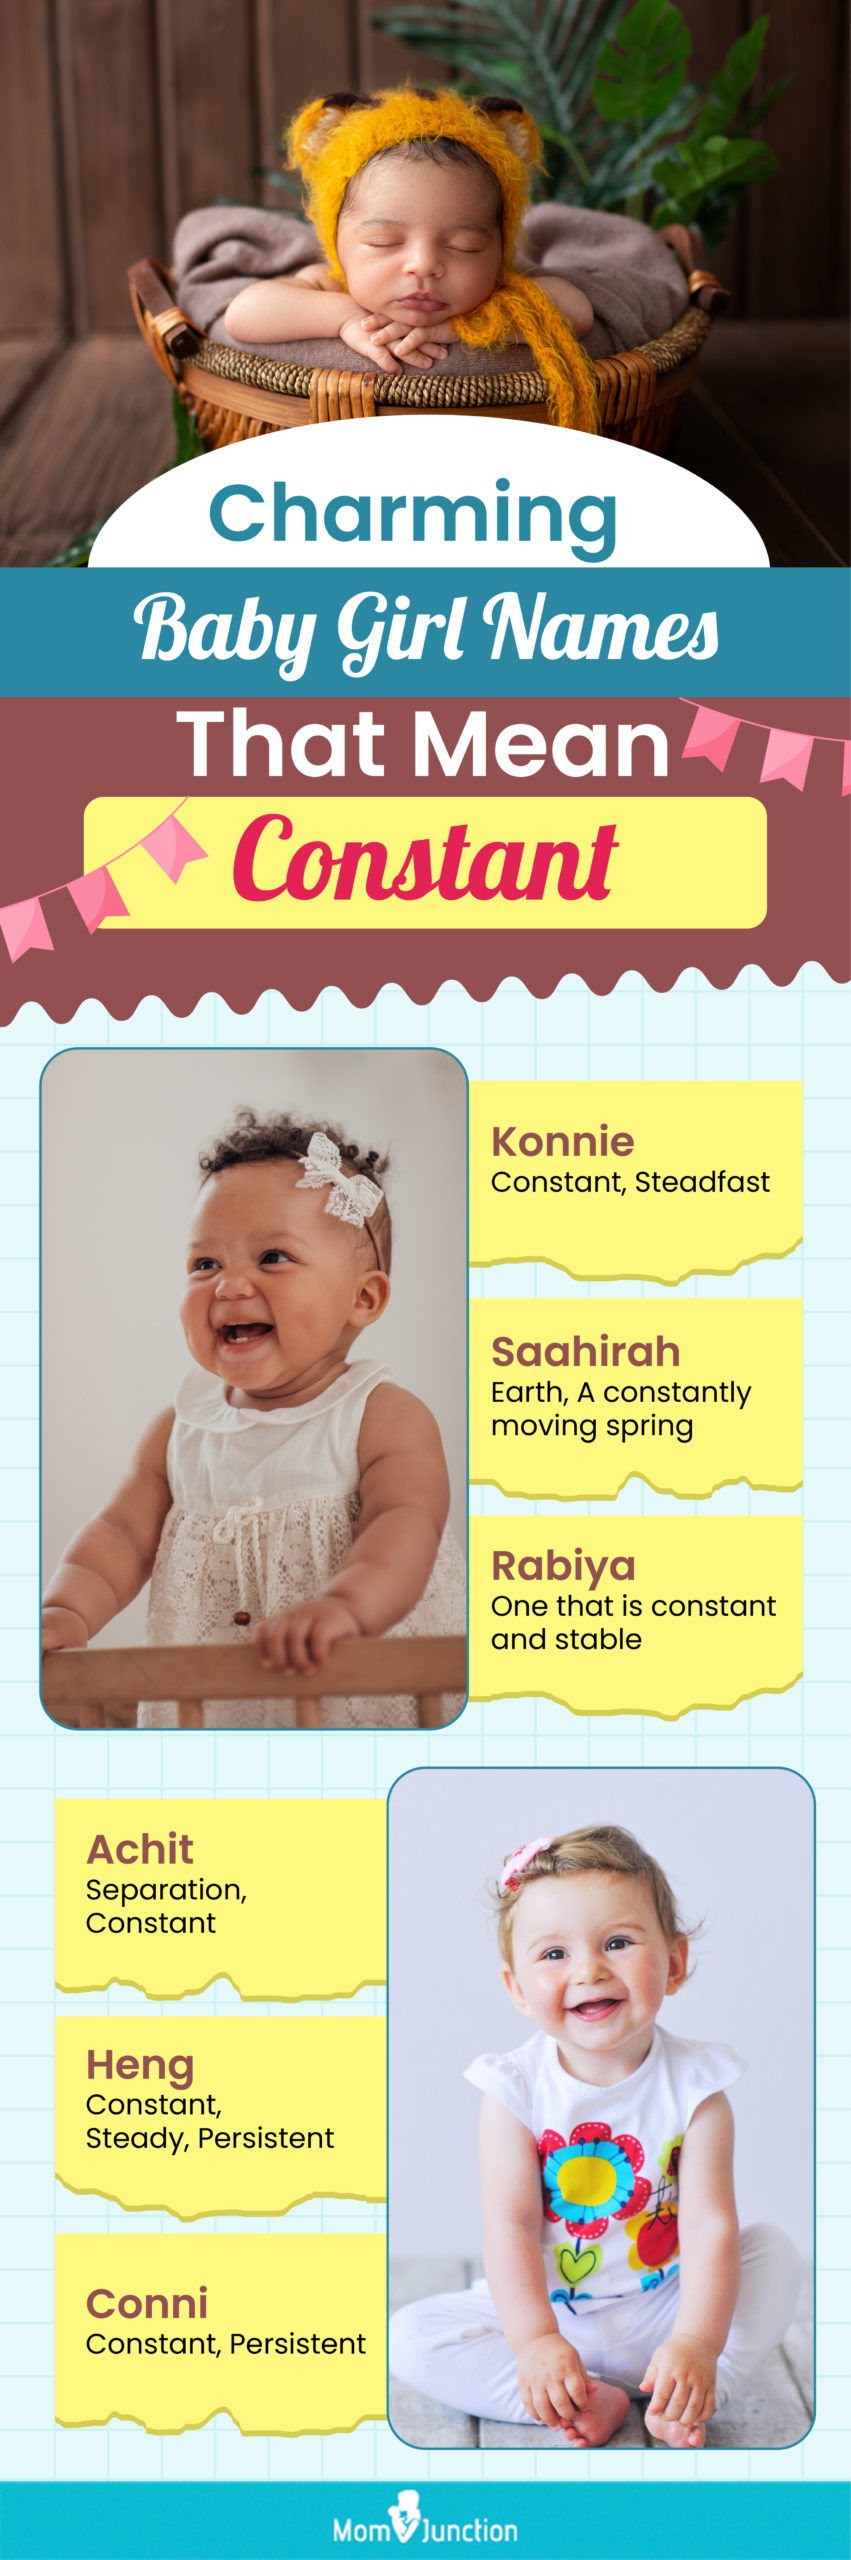 charming baby girl names that mean constant (infographic)